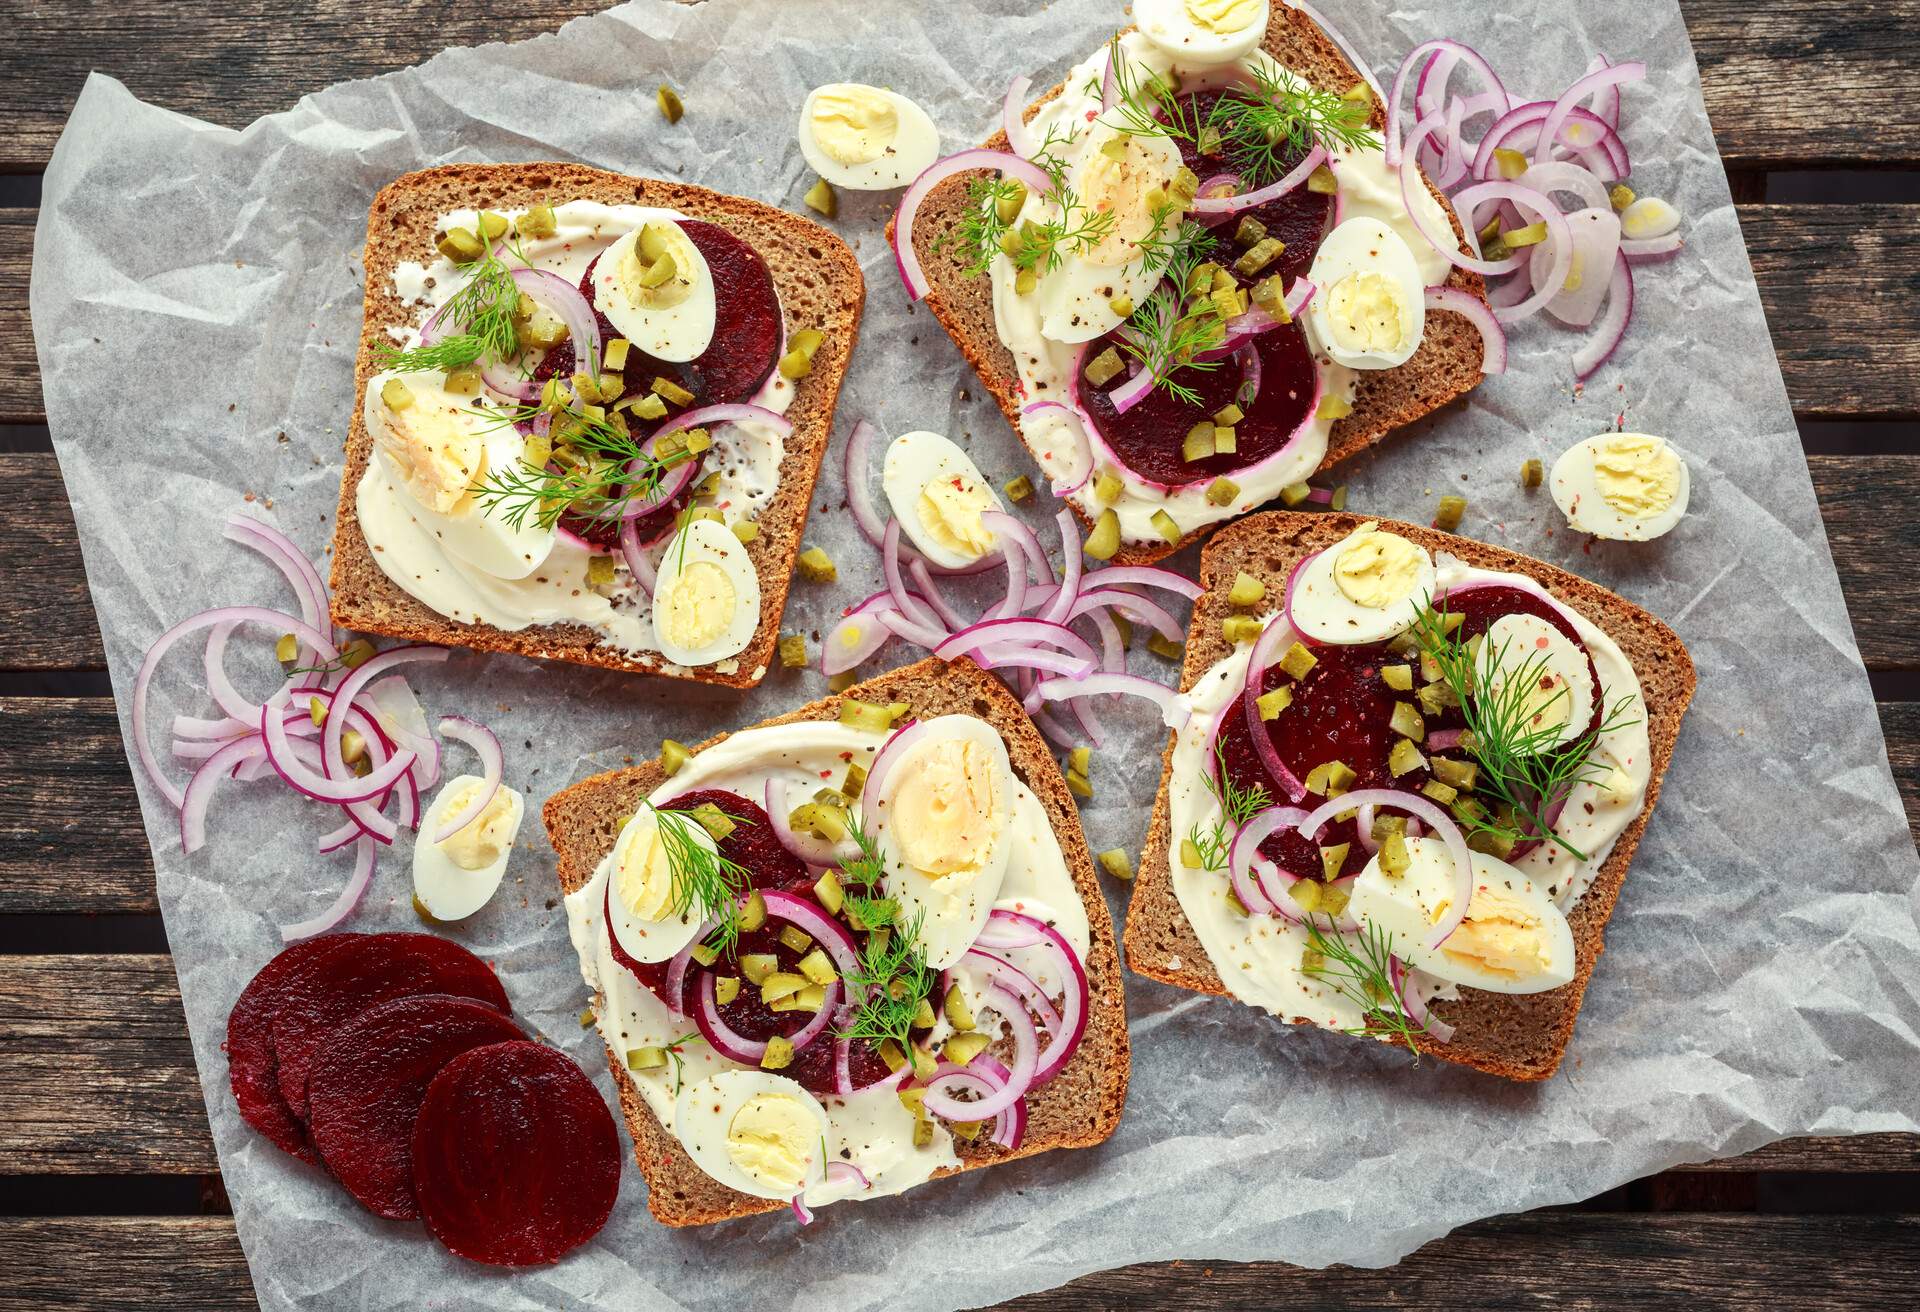 Danish open-face rye sandwich with quail eggs, beetroot, pickled onions and cucumbers drizzled with dill.